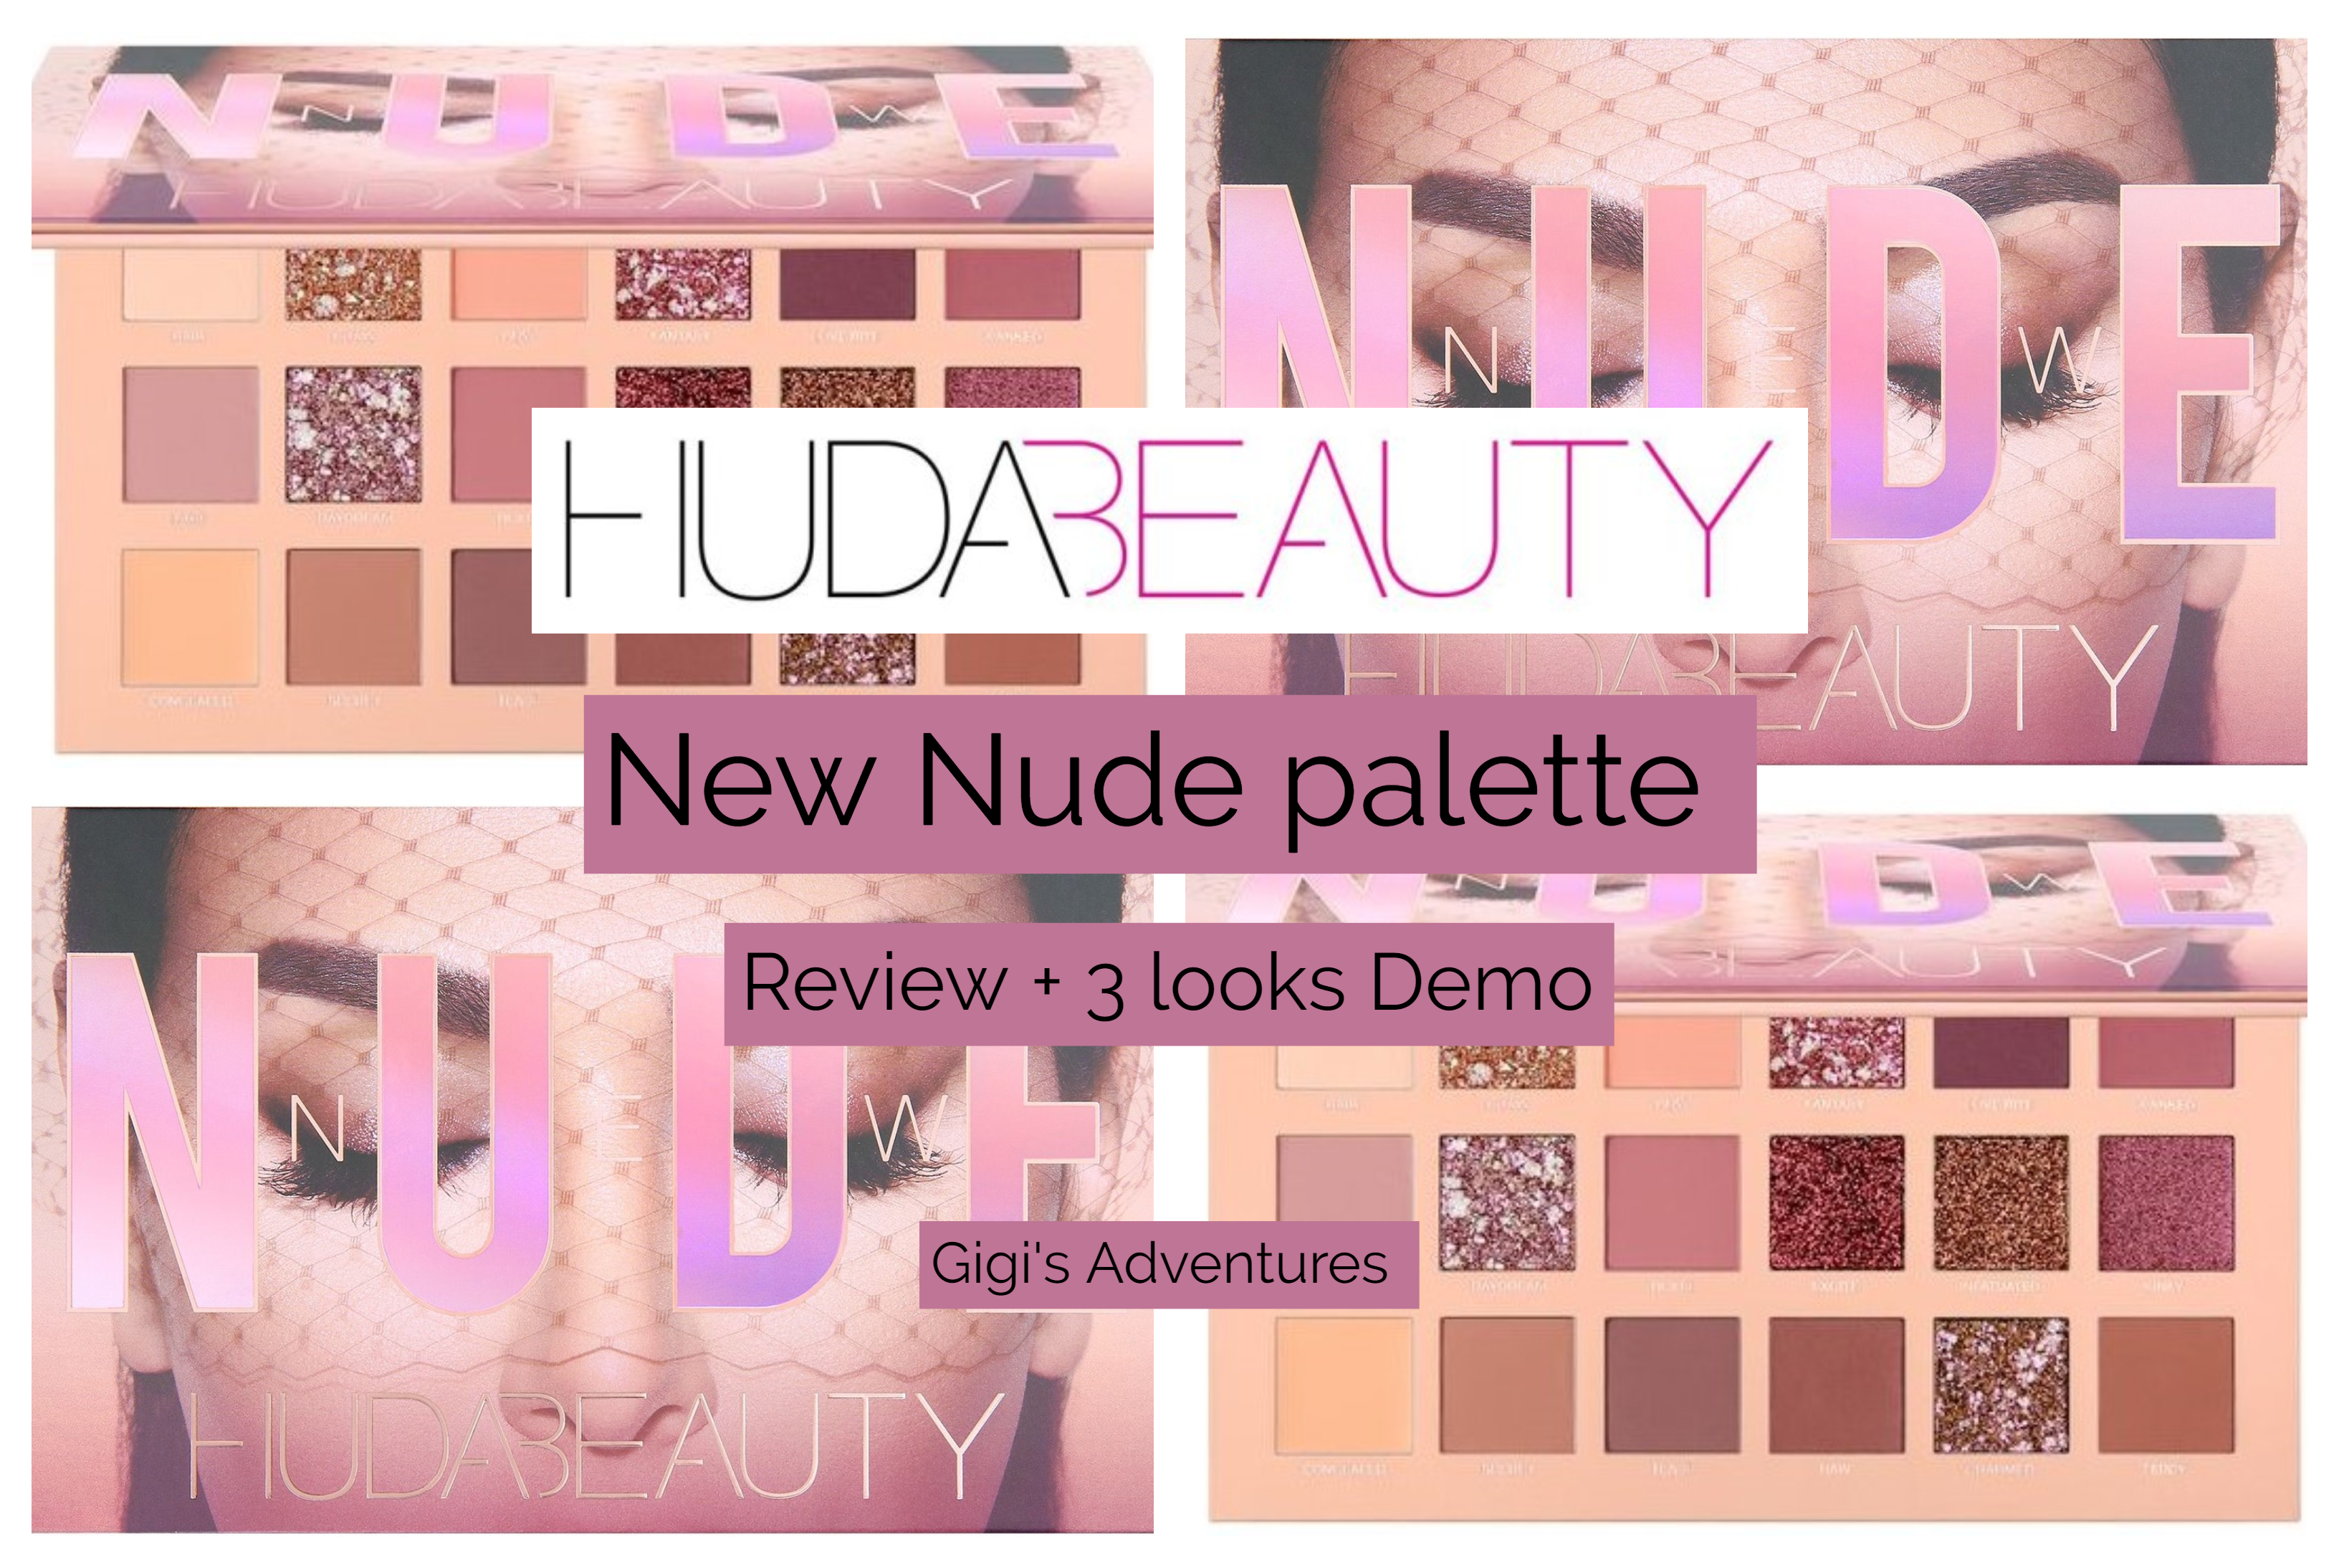 Huda Beauty New Nude palette Review + 3 looks Demo